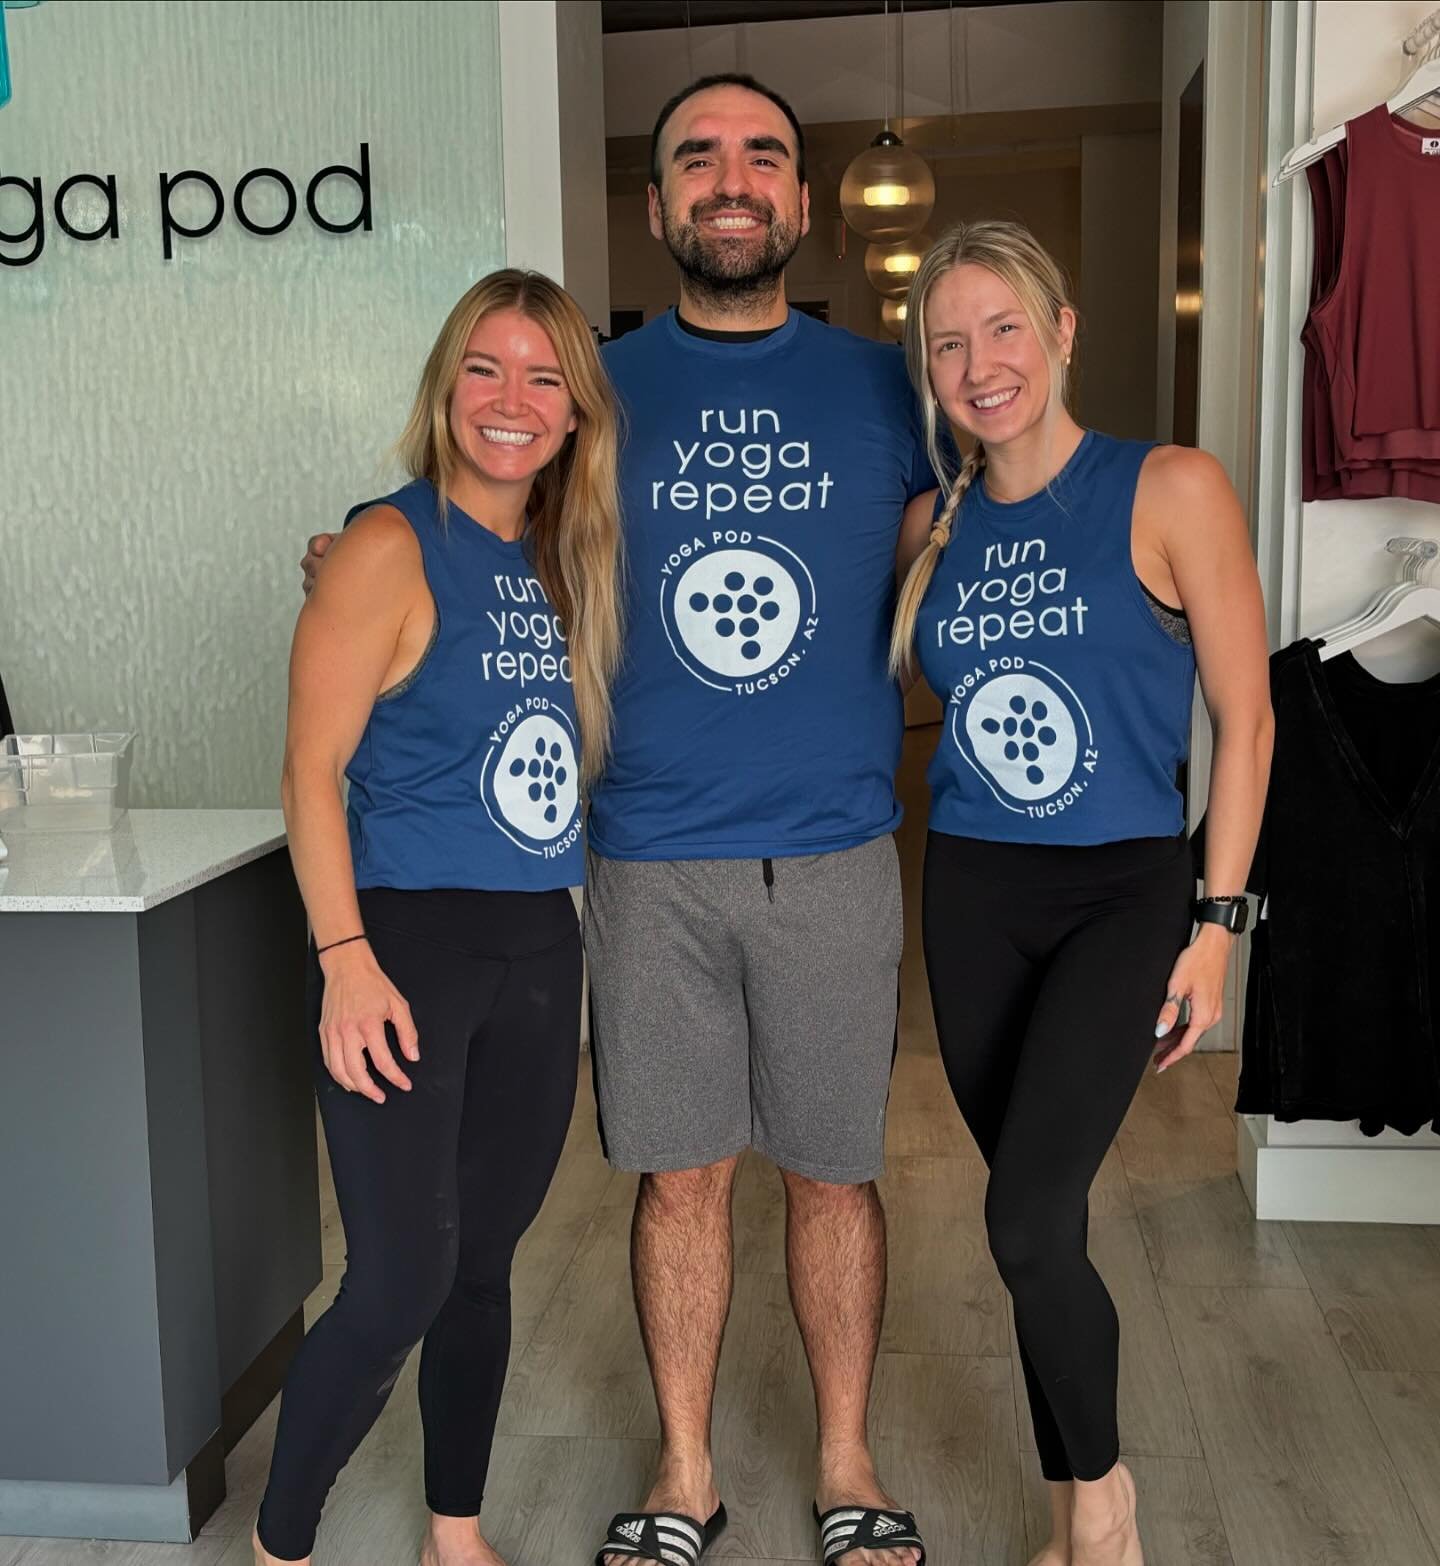 Join team Yoga Pod Tucson for the Meet Me Downtown 5k on June 1st! 💙🏃 (walk or run) We&rsquo;re sponsoring this amazing event by @runtucson and we&rsquo;d love to see you there! DM us for the link to sign up! ✍️

Ps&hellip; do you like these cool s